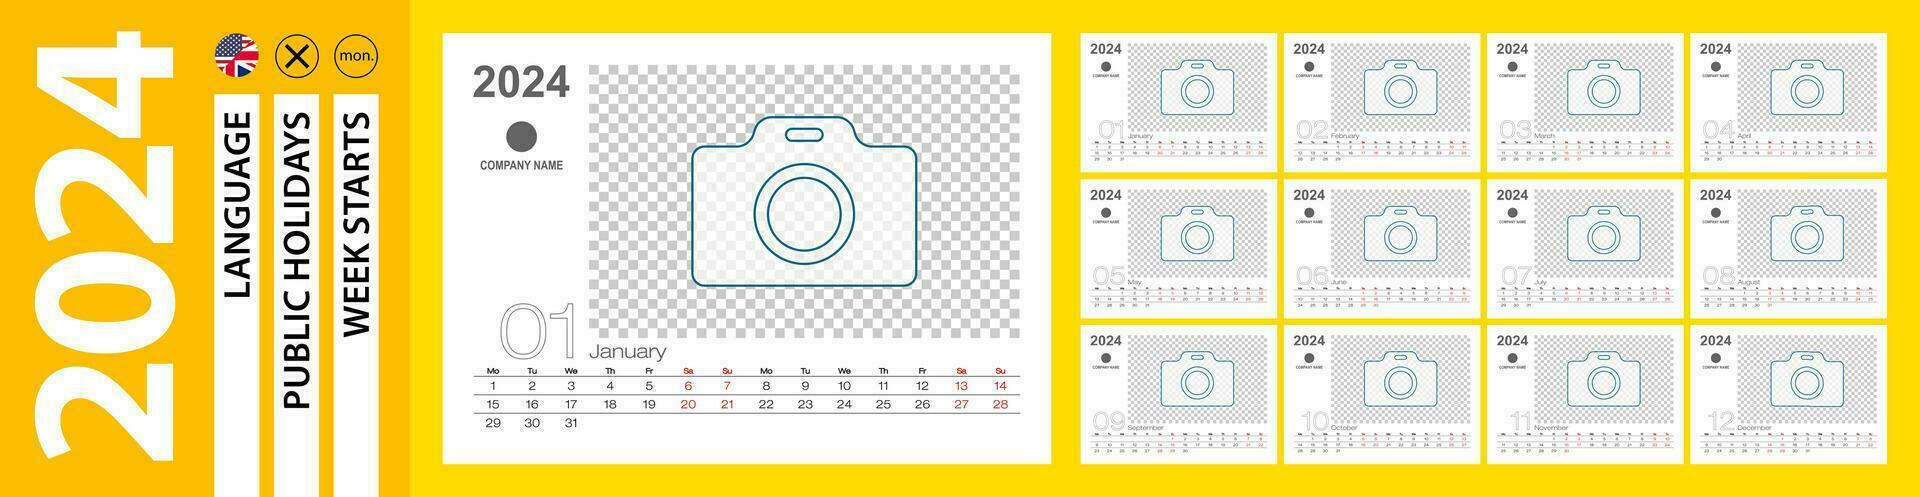 Desk Calendar for 2024 year, Monthly calendar with place for photo. Week starts on Monday. vector